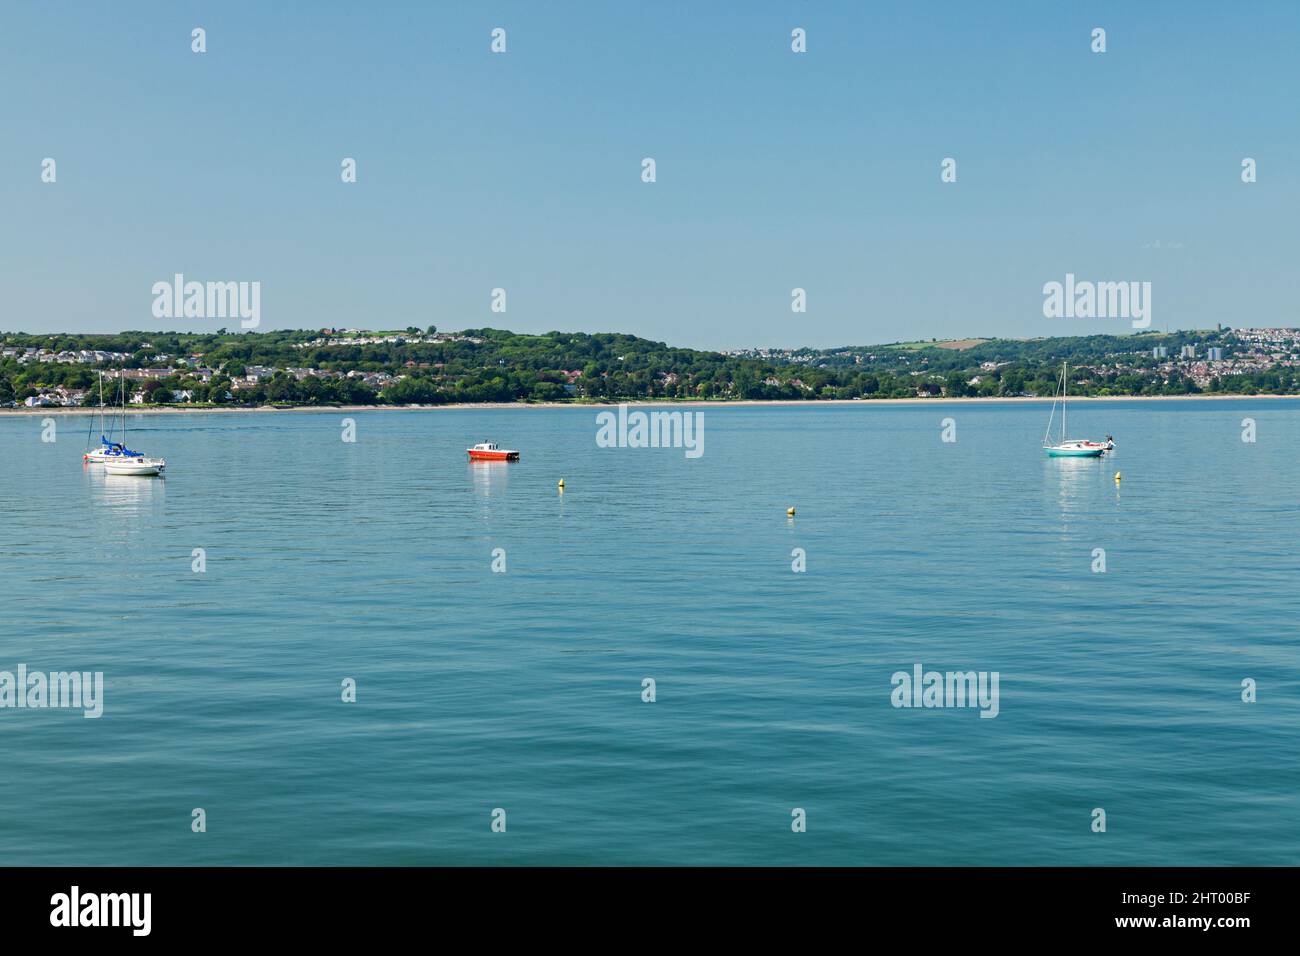 Swansea Bay with moored boats, Swansea, South Wales, UK Stock Photo